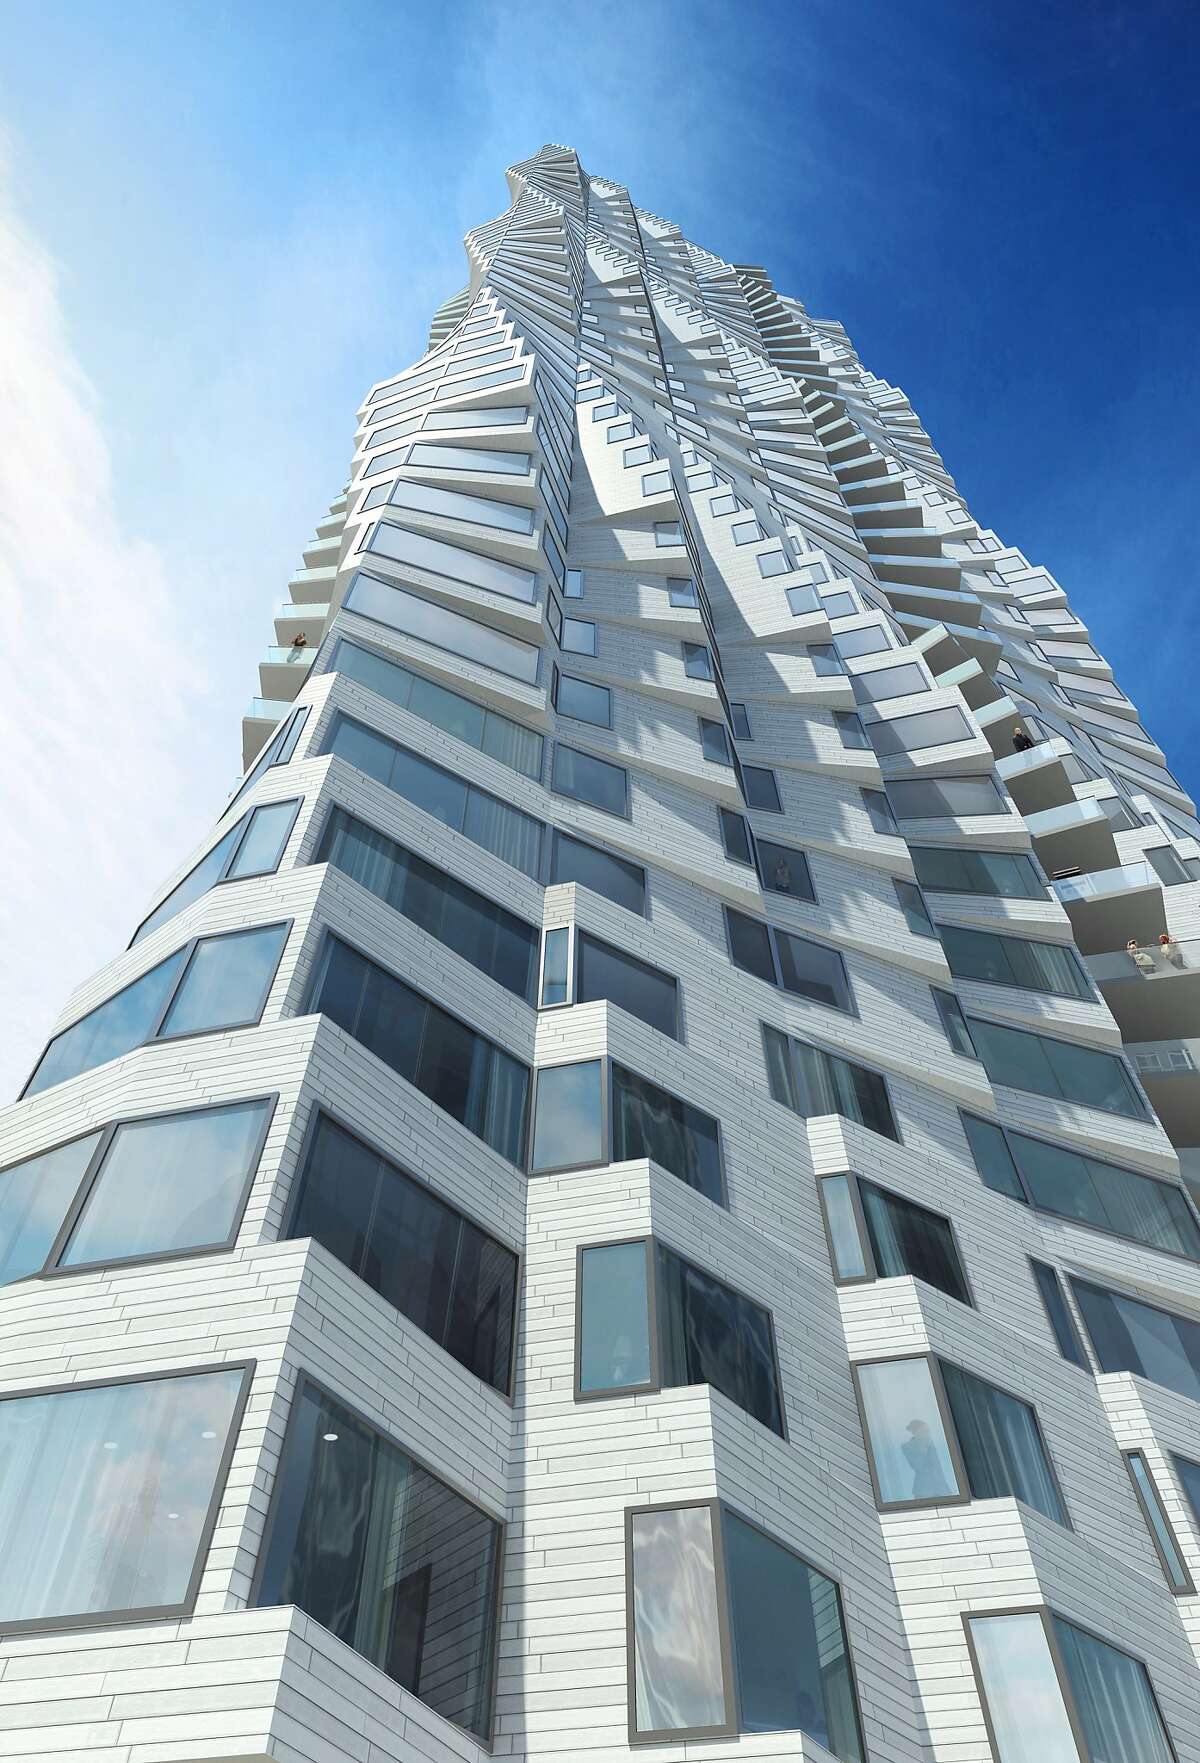 The proposed residential tower at 160 Folsom St. by architect Jeanne Gang for developer Tishman Speyer. It would rise one block inland from the Embarcadero.